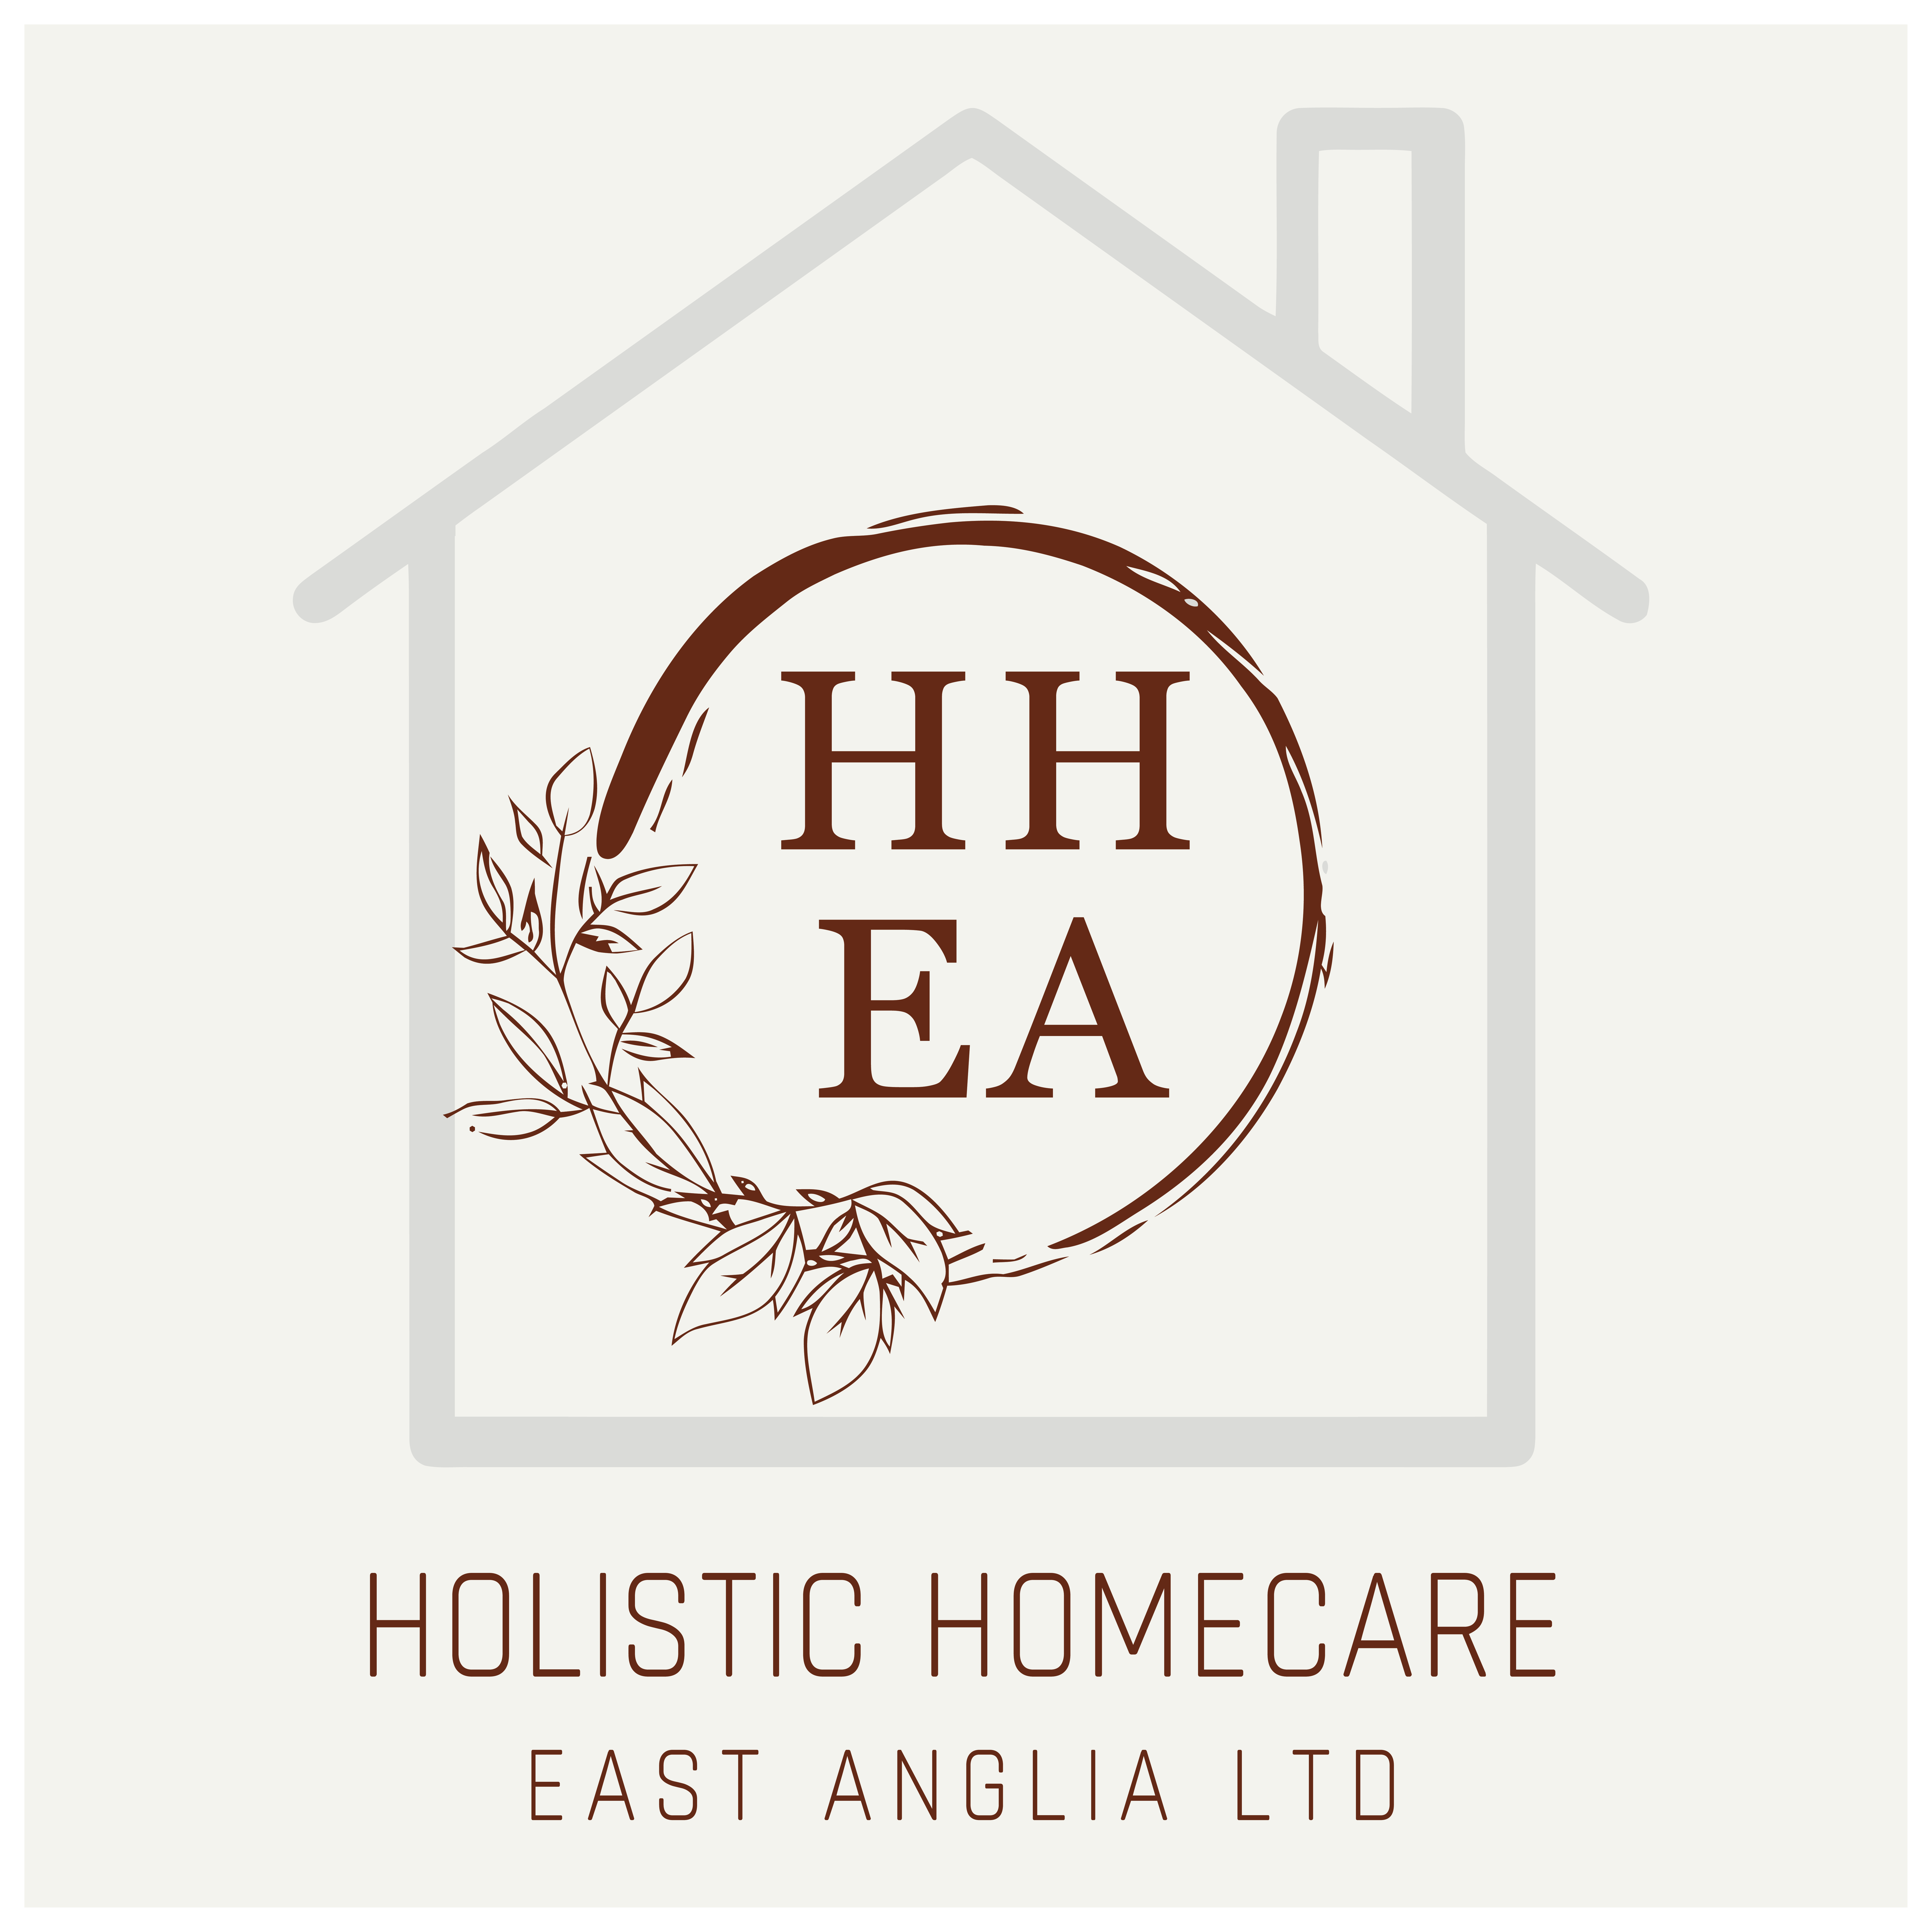 Company Logo: The outline of a house with the letters HHEA in a circle  showing inclusion with a branch showing gardening and the letters of the company also meaning Health Happiness Equality Affordability